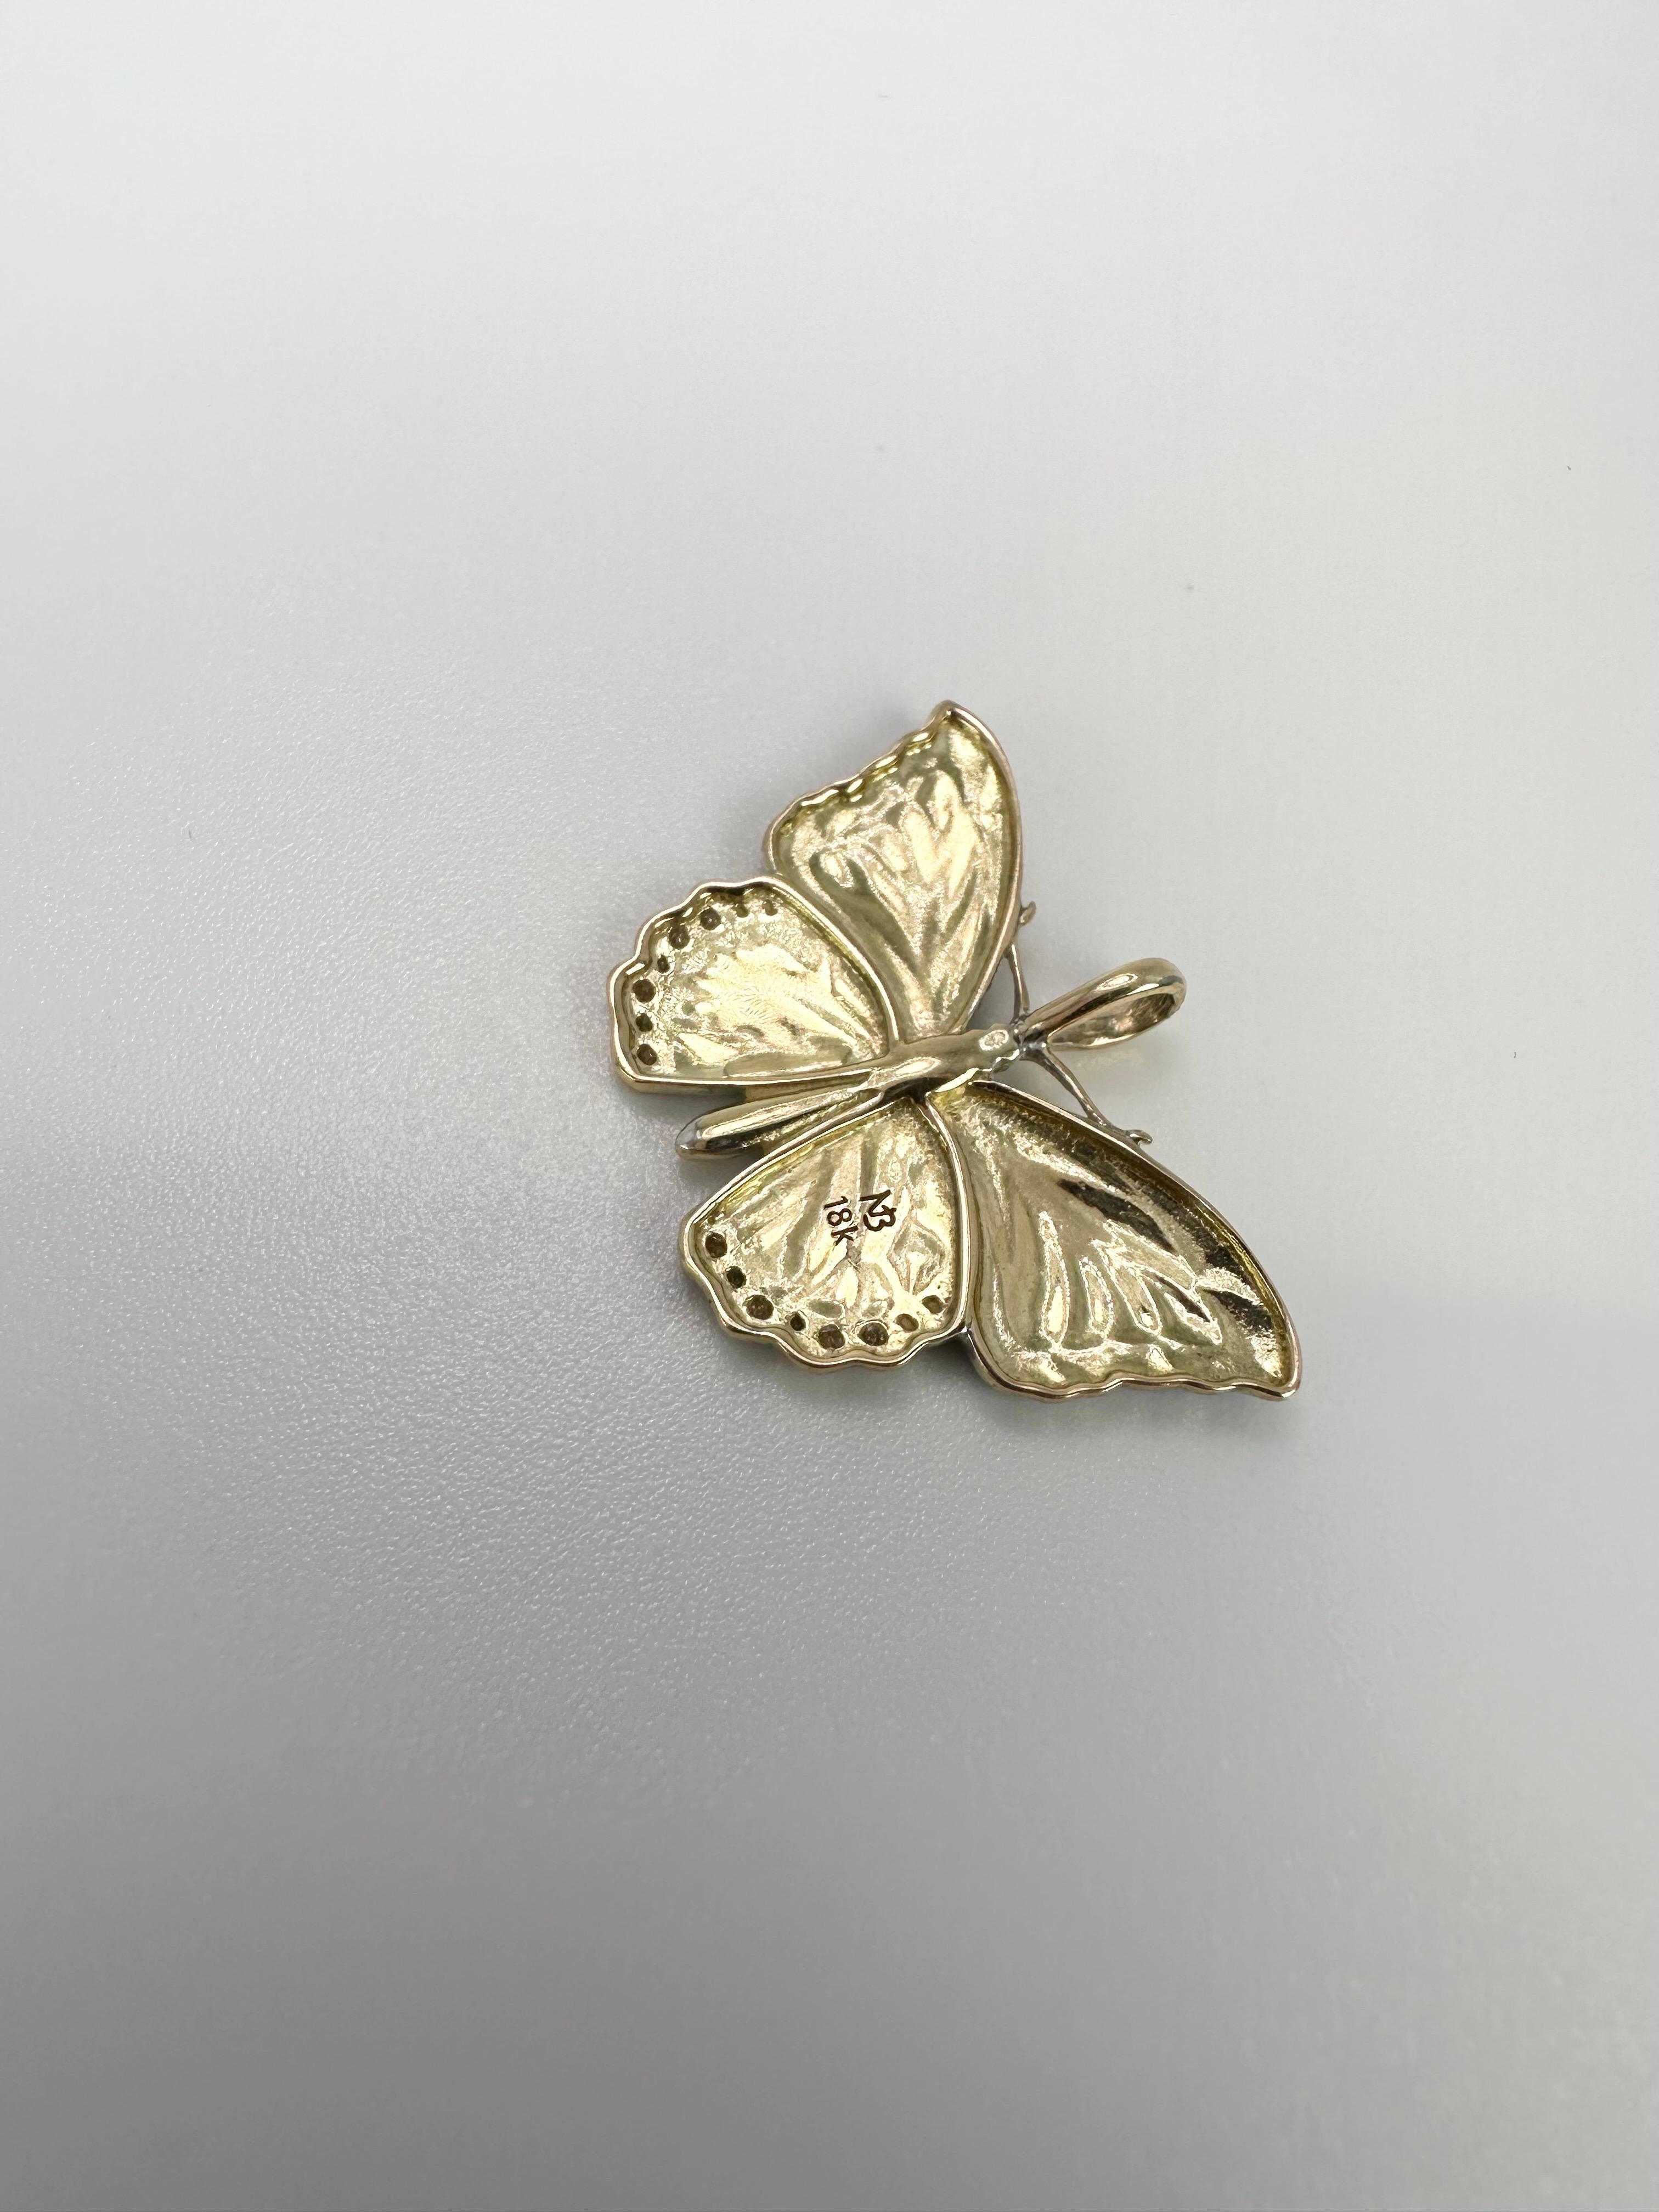 Diamond butterfly pendant necklace 18KT yellow gold In New Condition For Sale In Jupiter, FL